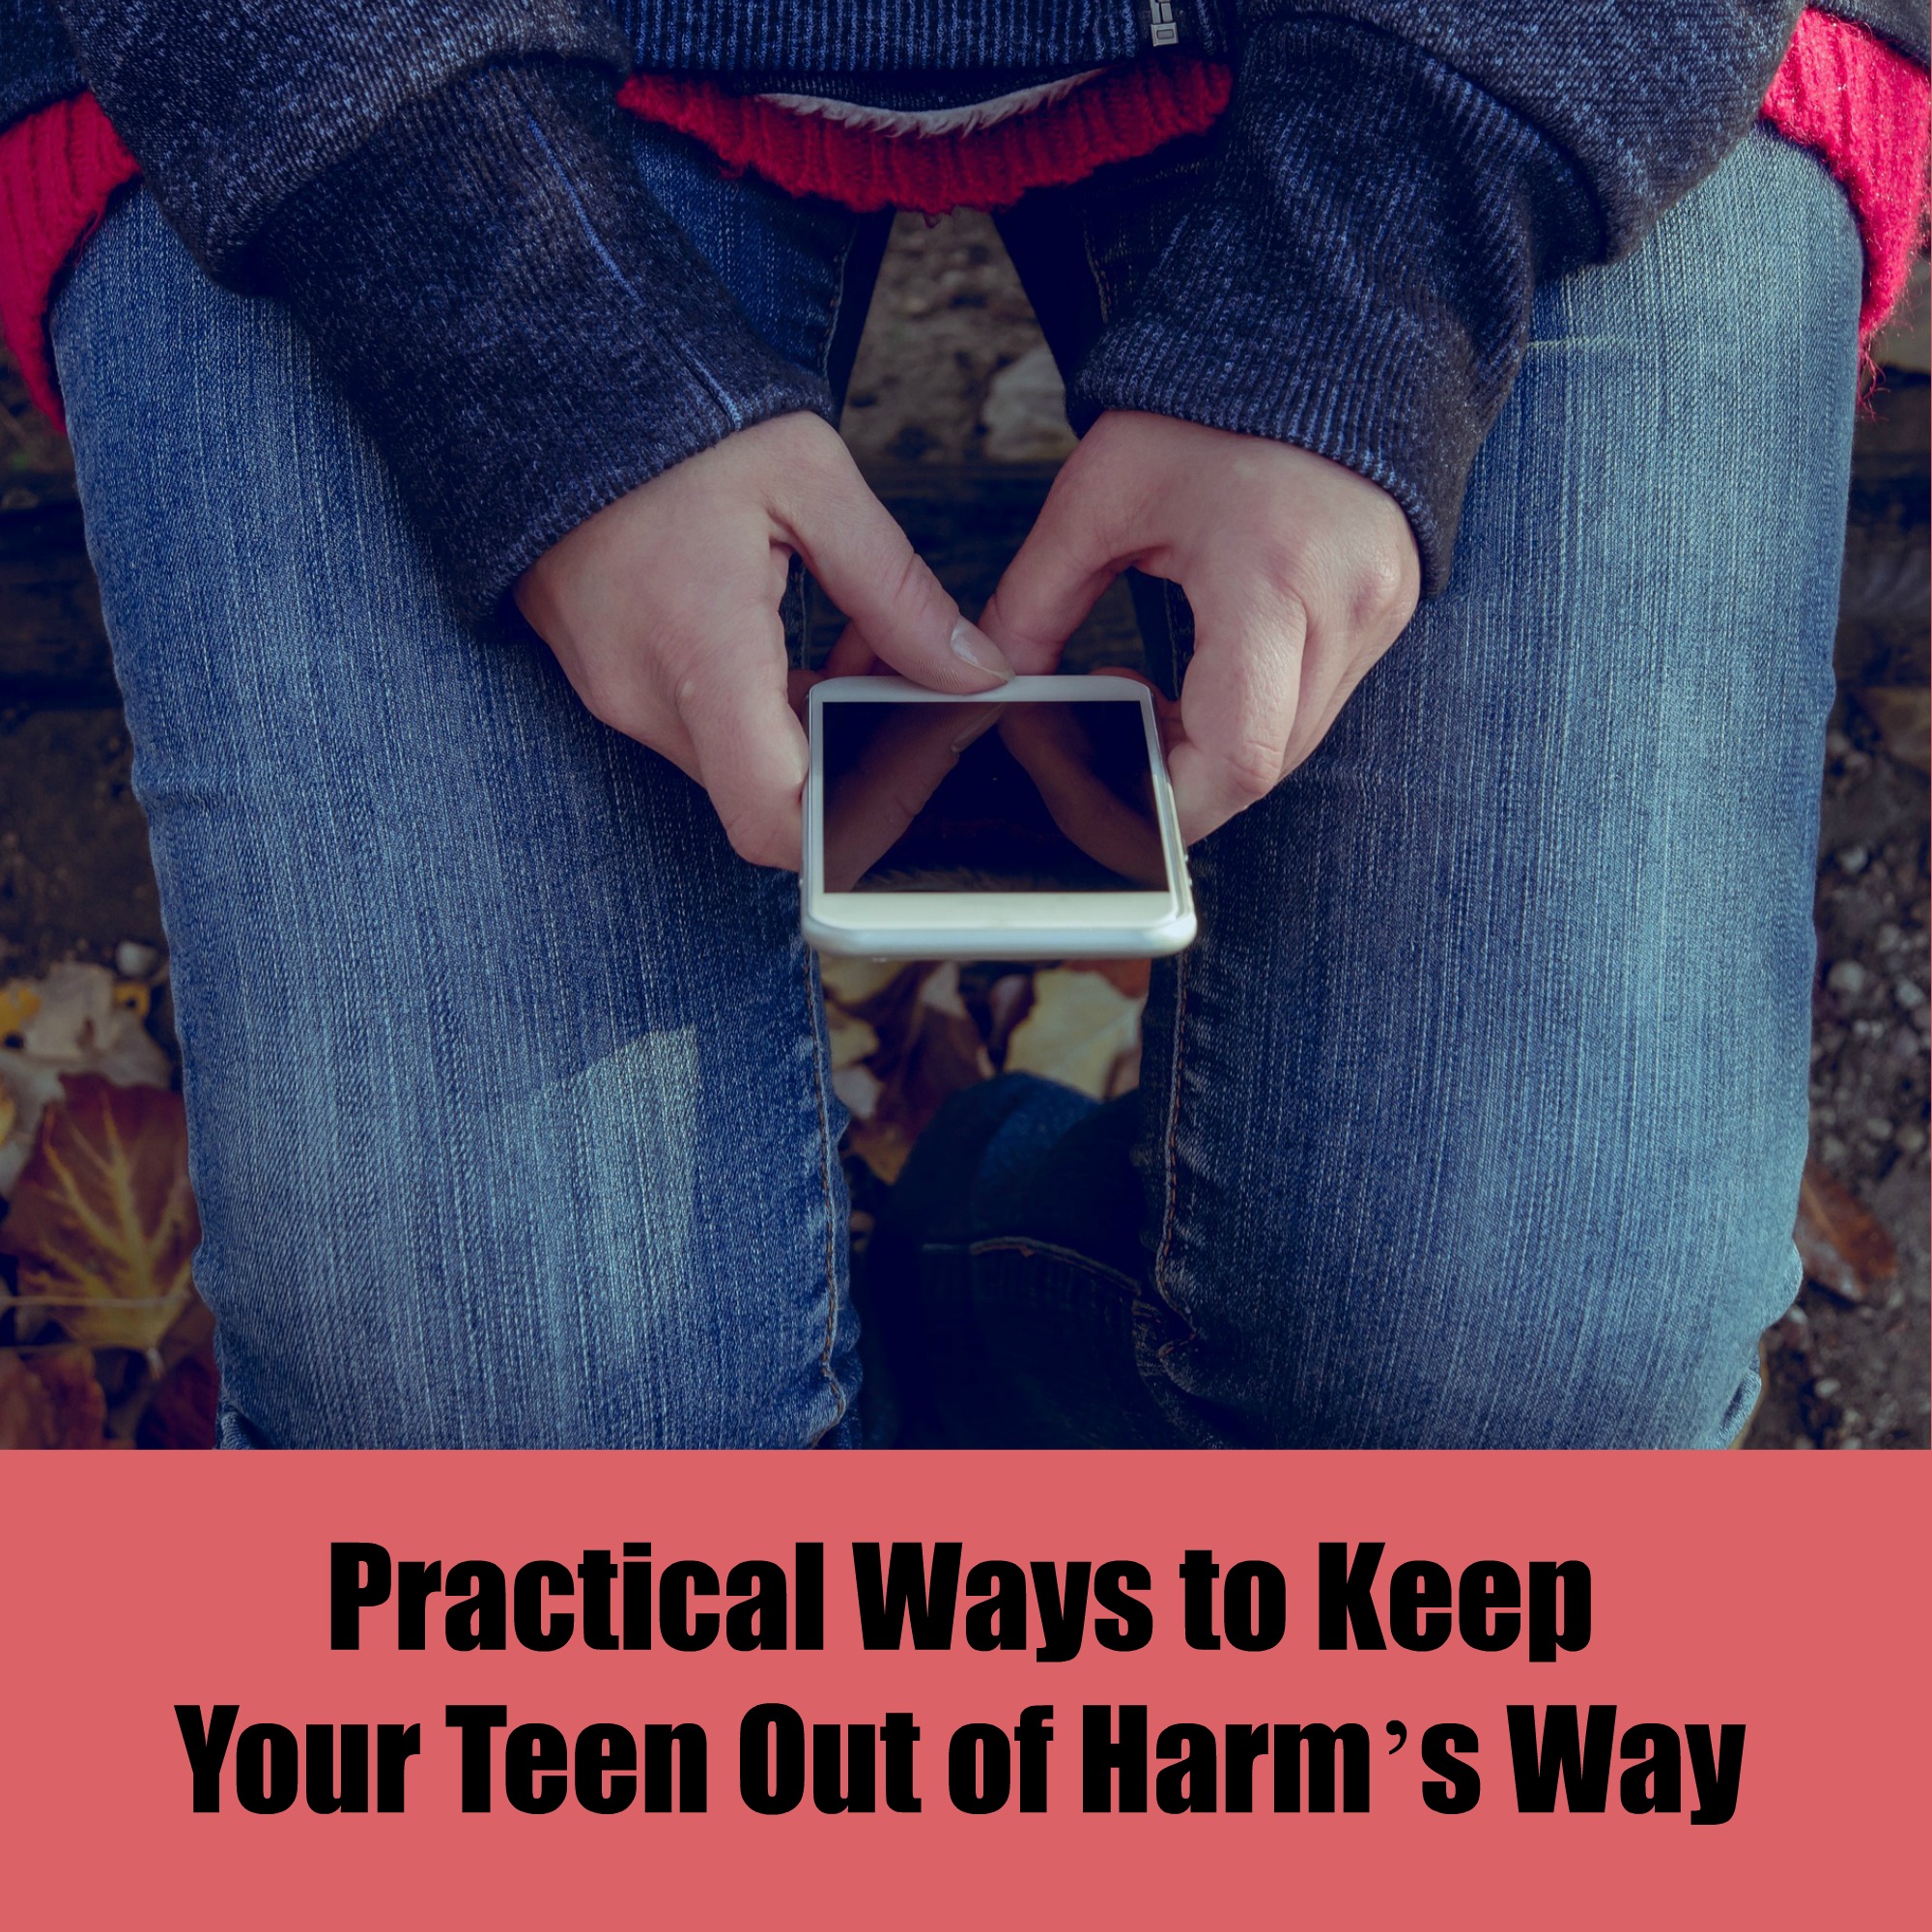 Practical Ways to Keep Your Teens Out of Harm’s Way